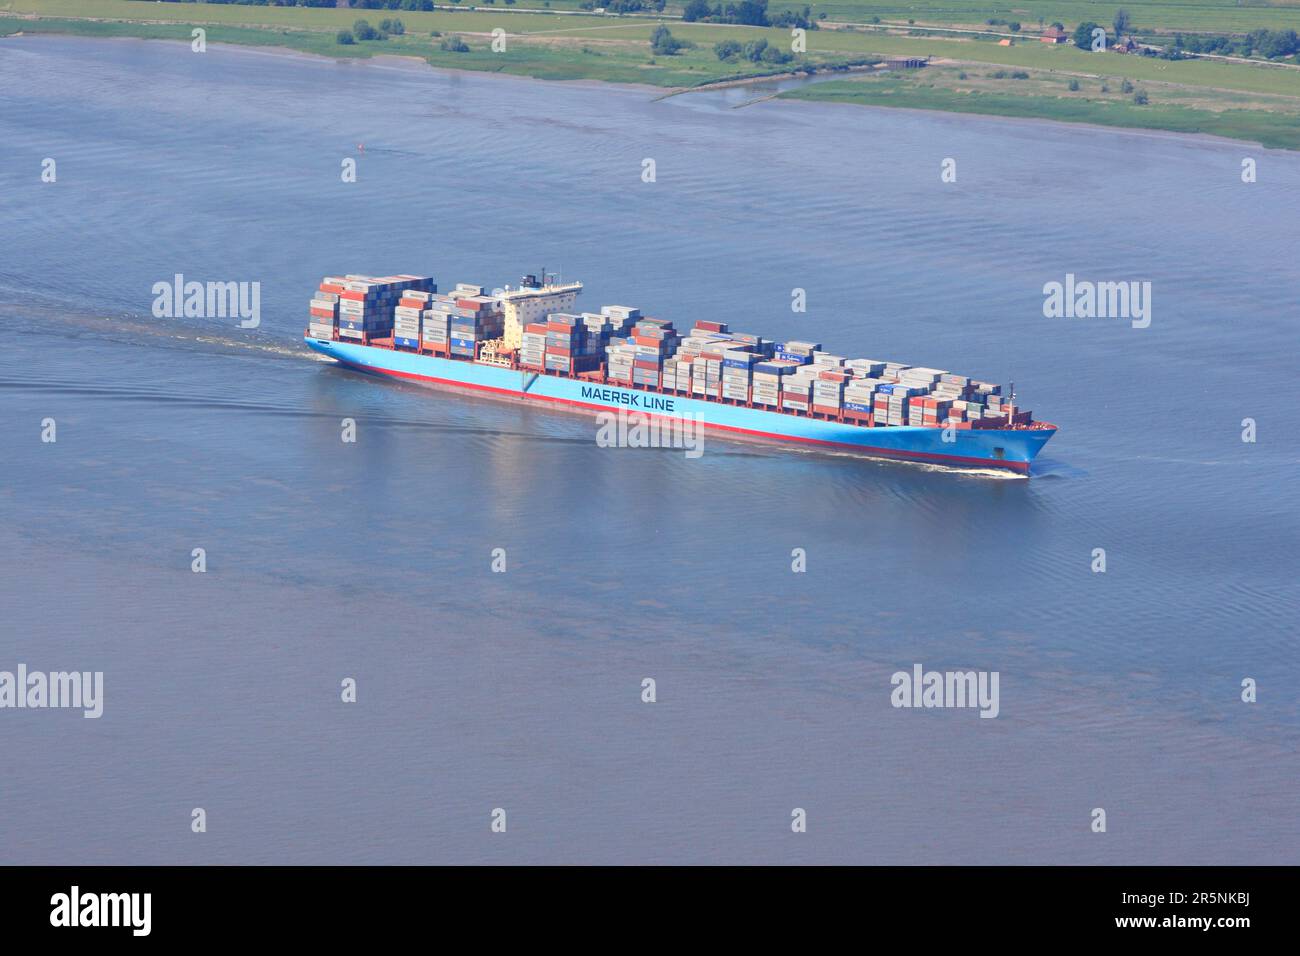 Container ship on the Elbe, Germany Stock Photo